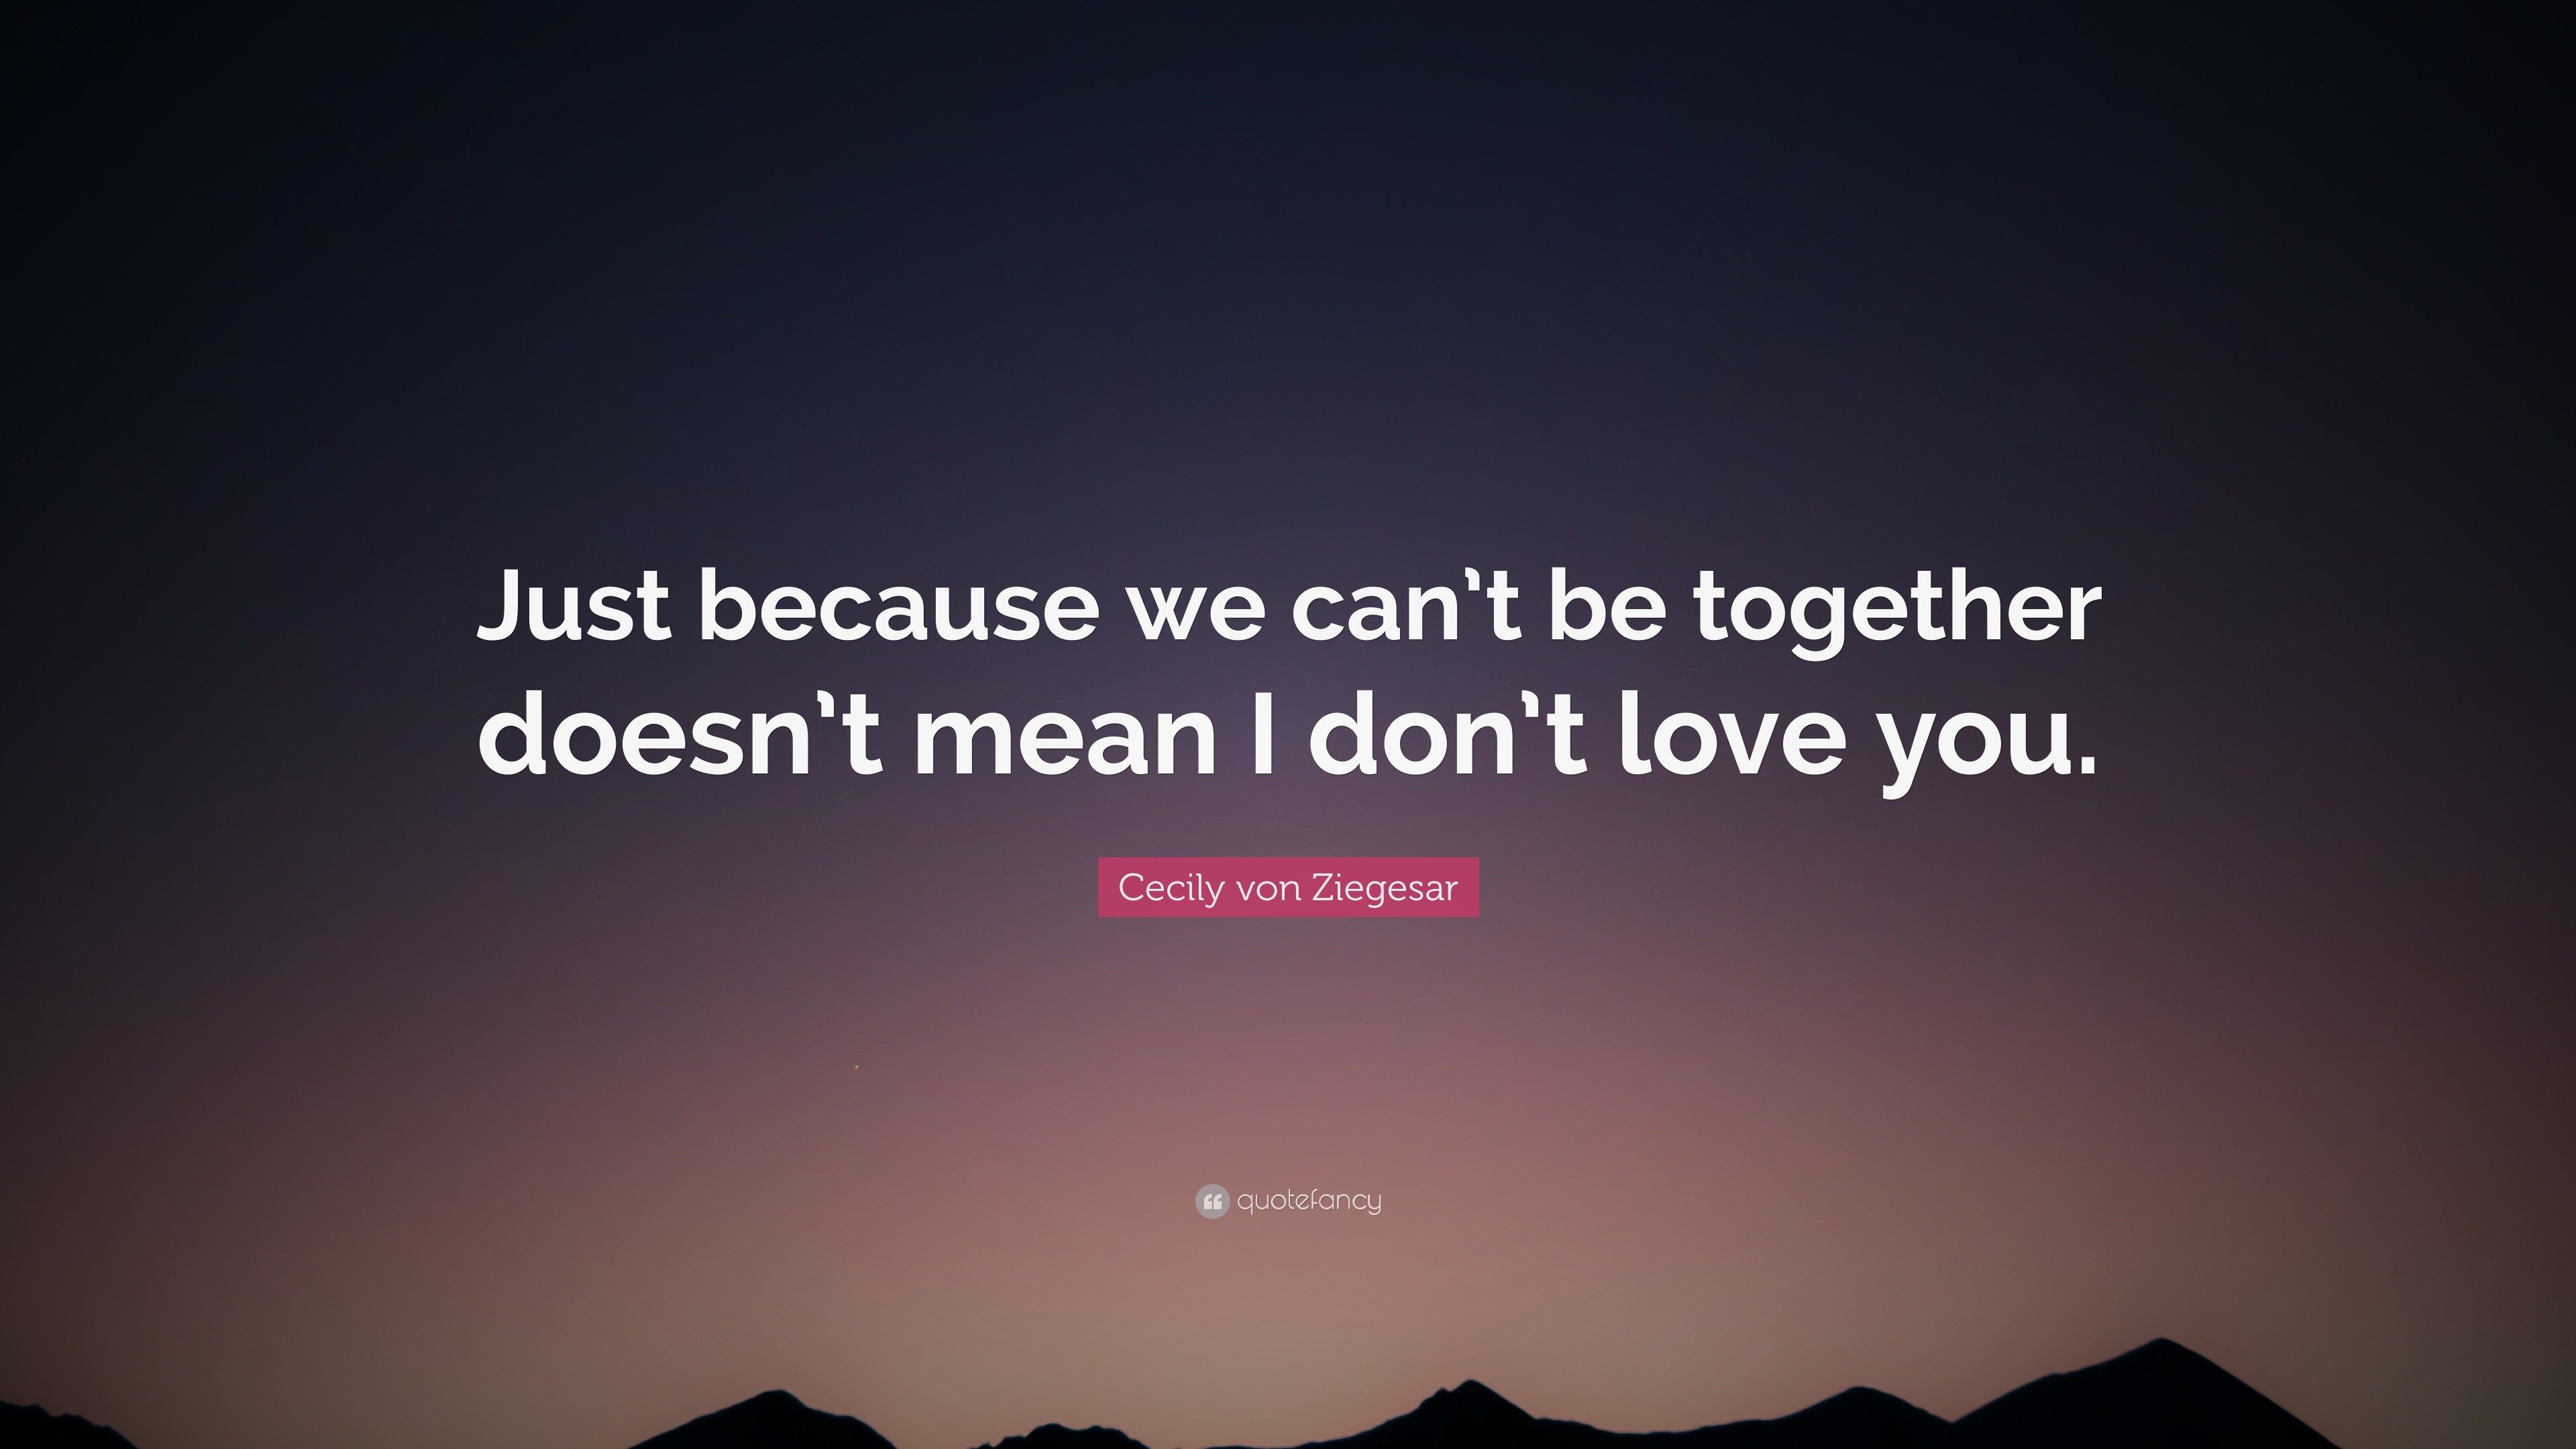 Cecily von Ziegesar Quote “Just because we can t be to her doesn